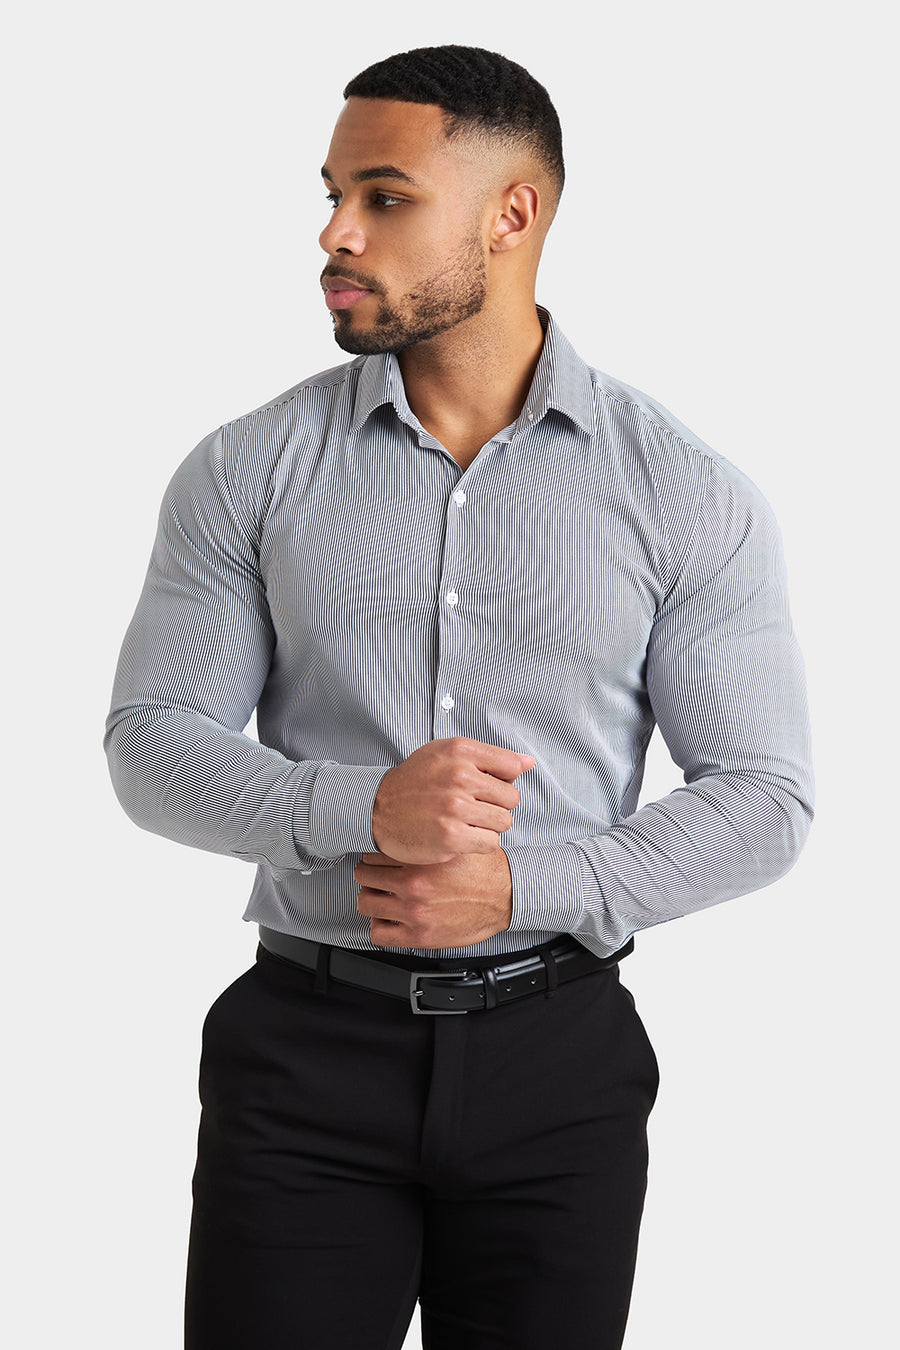 Performance Business Shirt in Navy Fine Stripe - TAILORED ATHLETE - USA